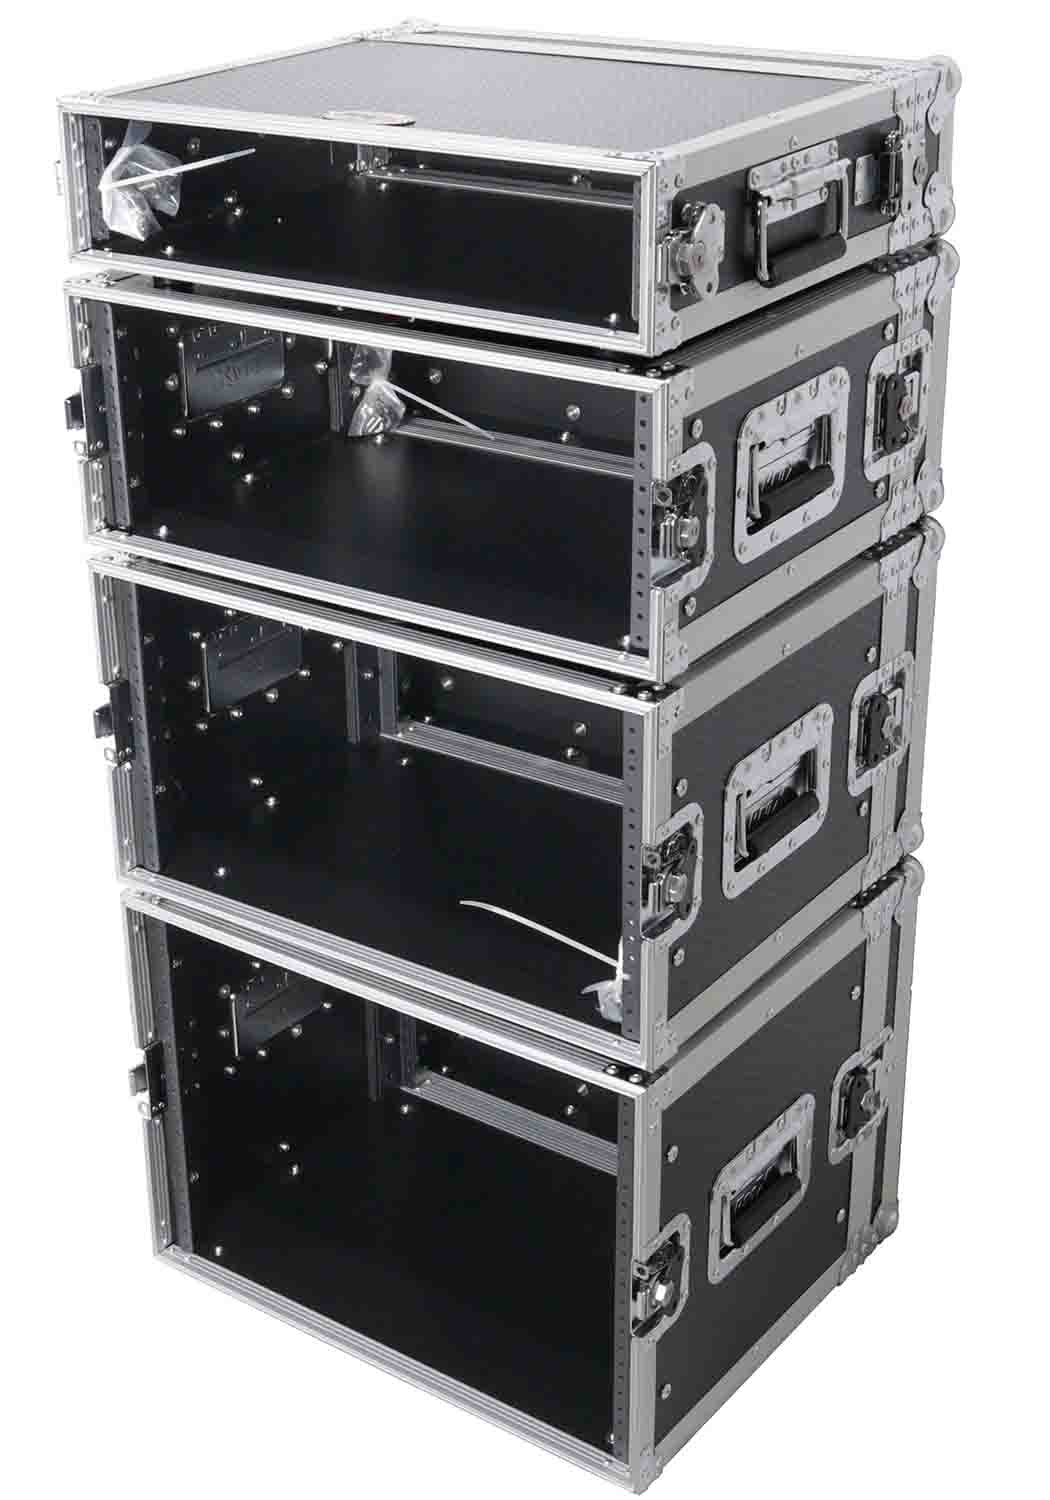 ProX X-4UE 4U Deluxe Effects Rack 14" Deep Rail to Rail with Handles - Hollywood DJ